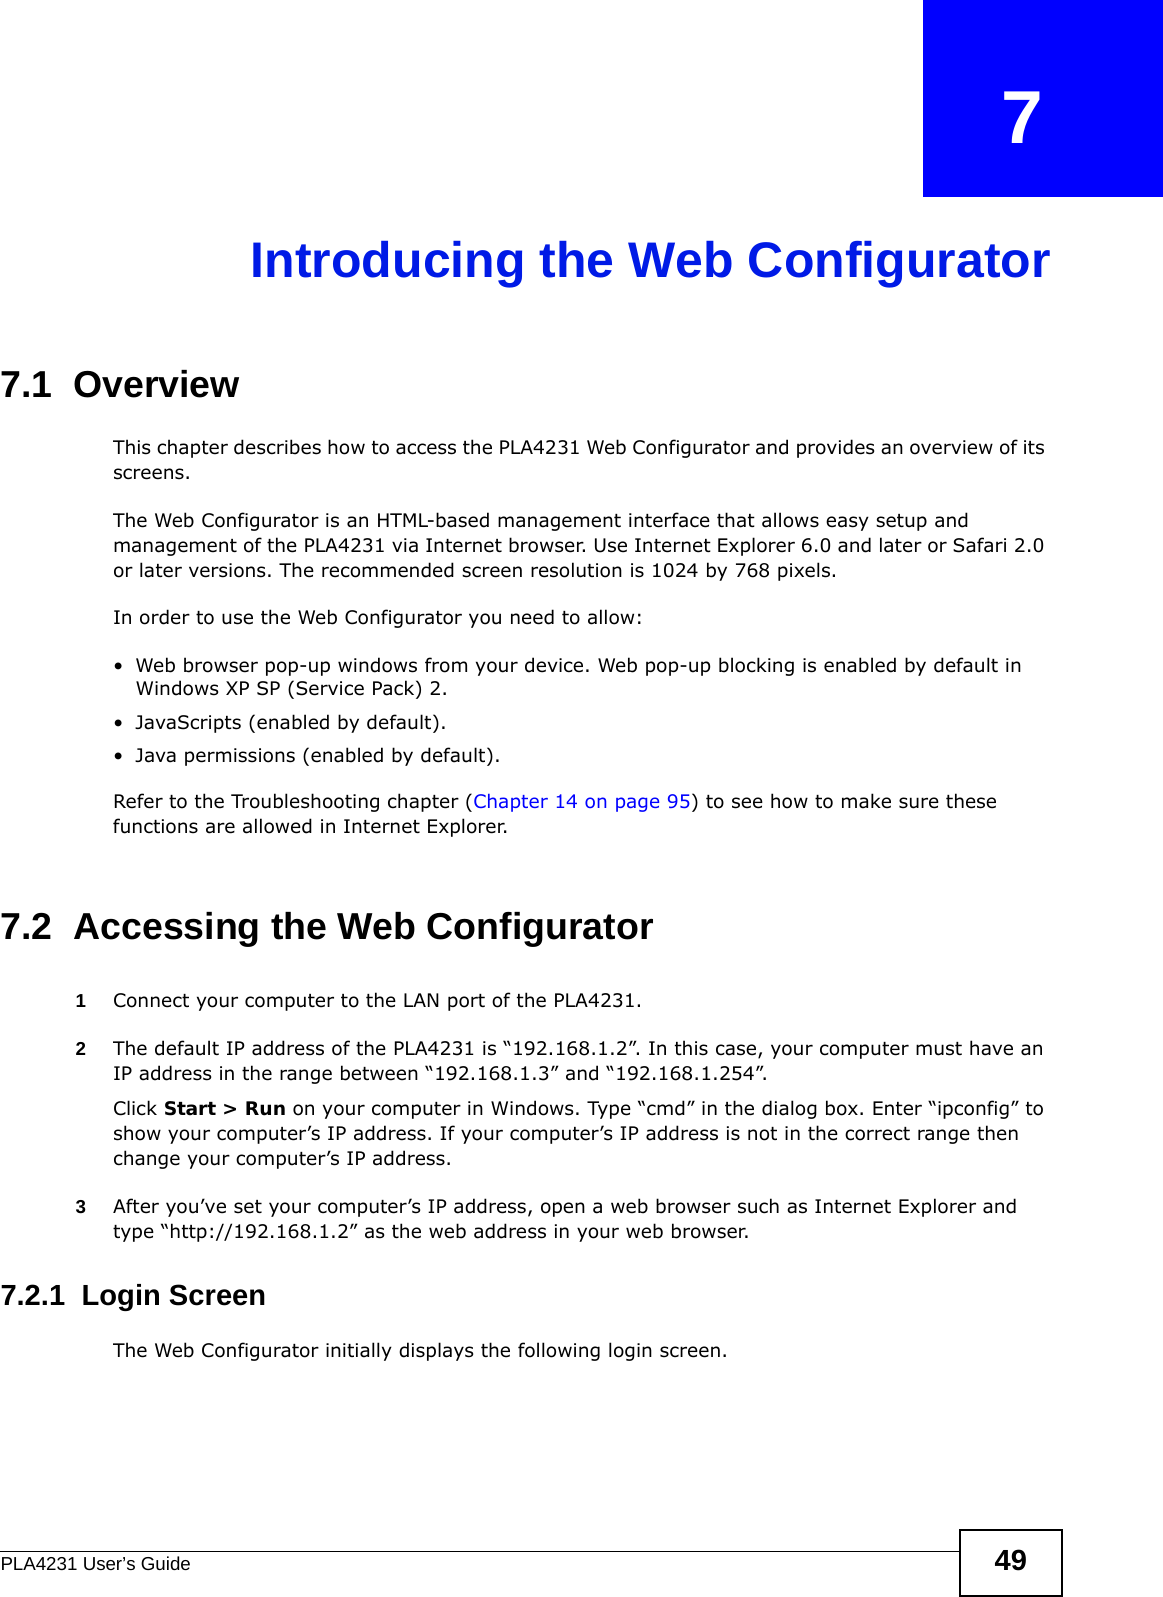 PLA4231 User’s Guide 49CHAPTER   7Introducing the Web Configurator7.1  OverviewThis chapter describes how to access the PLA4231 Web Configurator and provides an overview of its screens.The Web Configurator is an HTML-based management interface that allows easy setup and management of the PLA4231 via Internet browser. Use Internet Explorer 6.0 and later or Safari 2.0 or later versions. The recommended screen resolution is 1024 by 768 pixels.In order to use the Web Configurator you need to allow:• Web browser pop-up windows from your device. Web pop-up blocking is enabled by default in Windows XP SP (Service Pack) 2.• JavaScripts (enabled by default).• Java permissions (enabled by default).Refer to the Troubleshooting chapter (Chapter 14 on page 95) to see how to make sure these functions are allowed in Internet Explorer.7.2  Accessing the Web Configurator1Connect your computer to the LAN port of the PLA4231. 2The default IP address of the PLA4231 is “192.168.1.2”. In this case, your computer must have an IP address in the range between “192.168.1.3” and “192.168.1.254”.Click Start &gt; Run on your computer in Windows. Type “cmd” in the dialog box. Enter “ipconfig” to show your computer’s IP address. If your computer’s IP address is not in the correct range then change your computer’s IP address.3After you’ve set your computer’s IP address, open a web browser such as Internet Explorer and type “http://192.168.1.2” as the web address in your web browser.7.2.1  Login ScreenThe Web Configurator initially displays the following login screen.